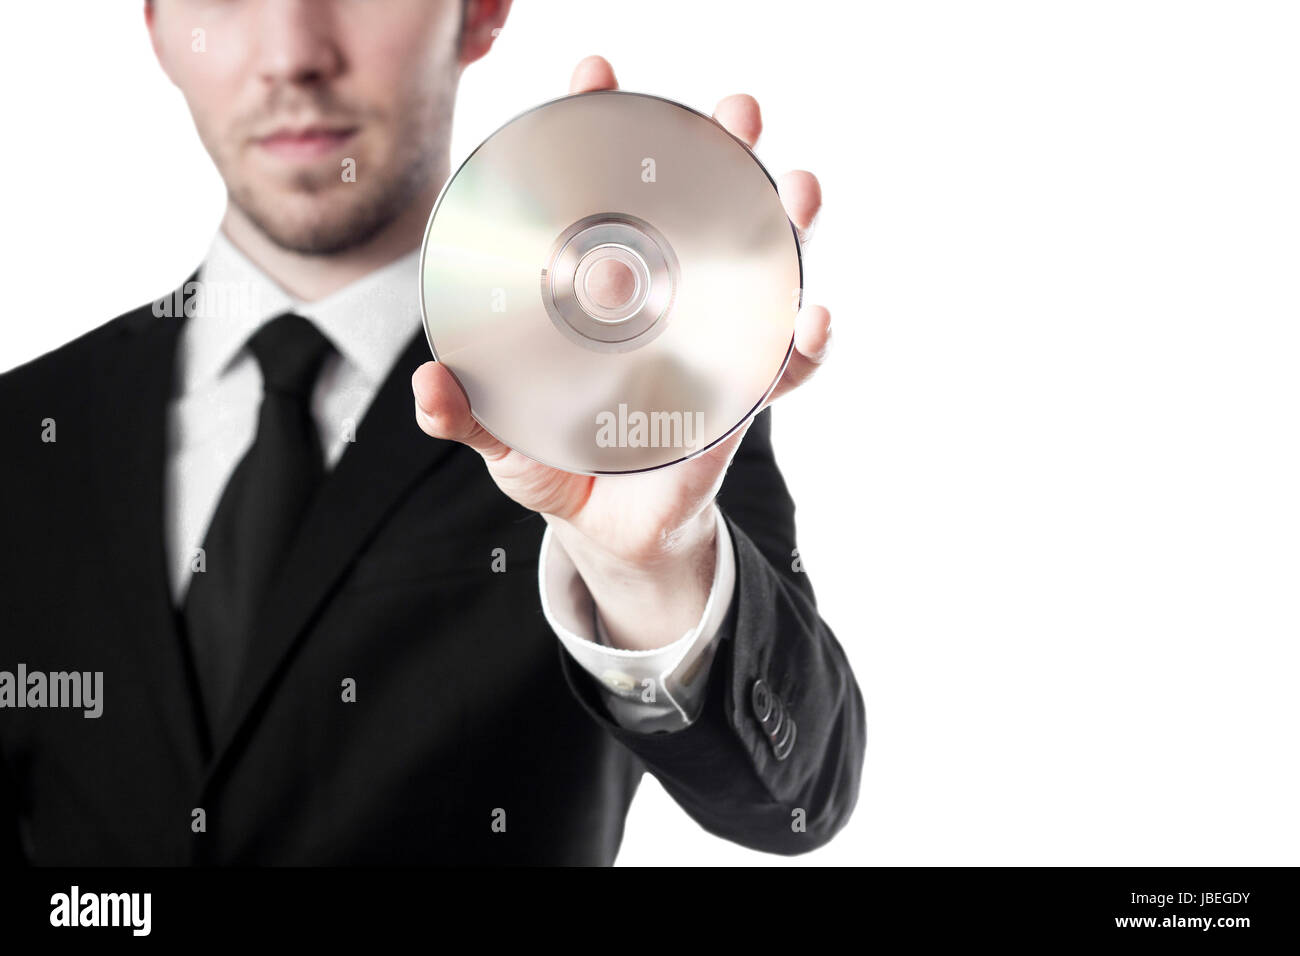 man with cd Stock Photo